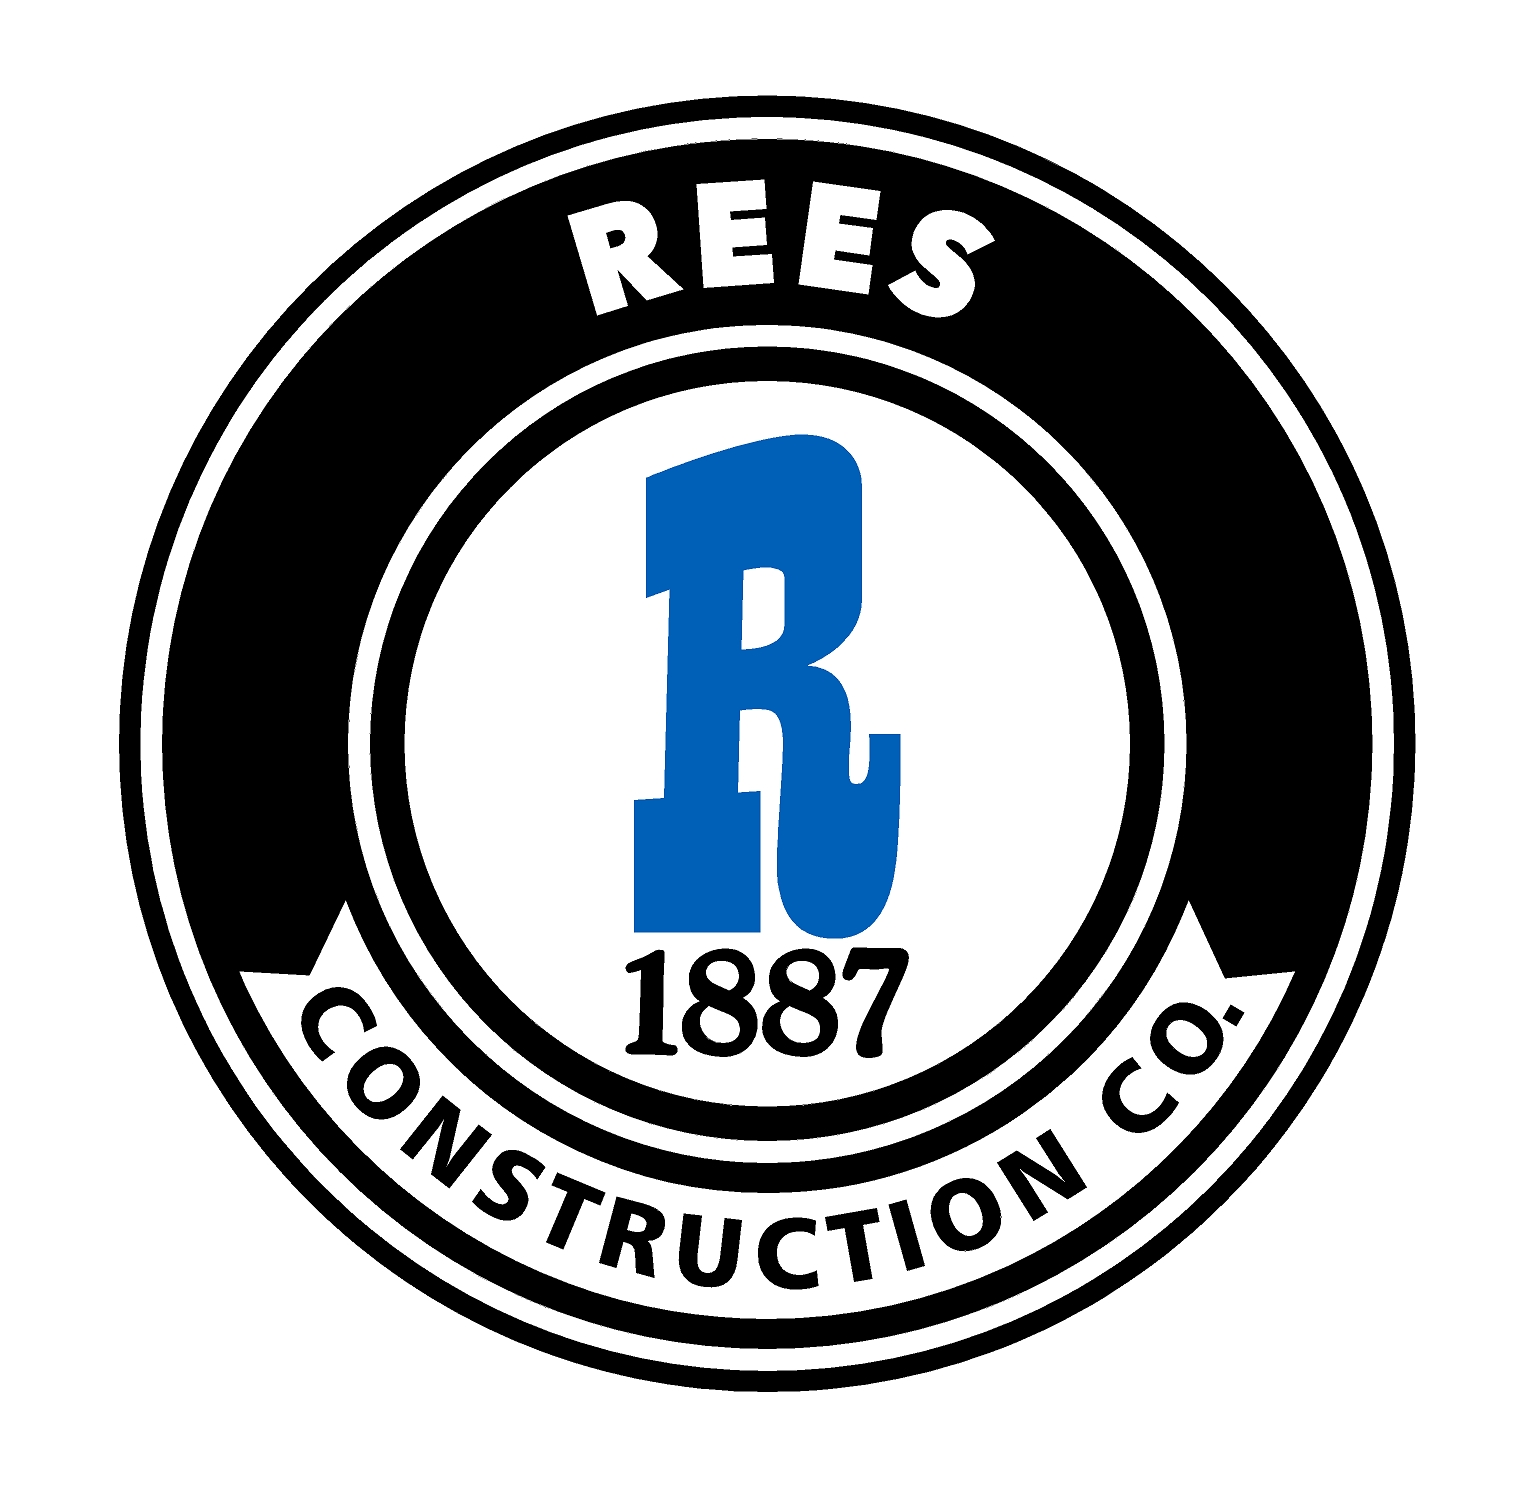 Rees Construction